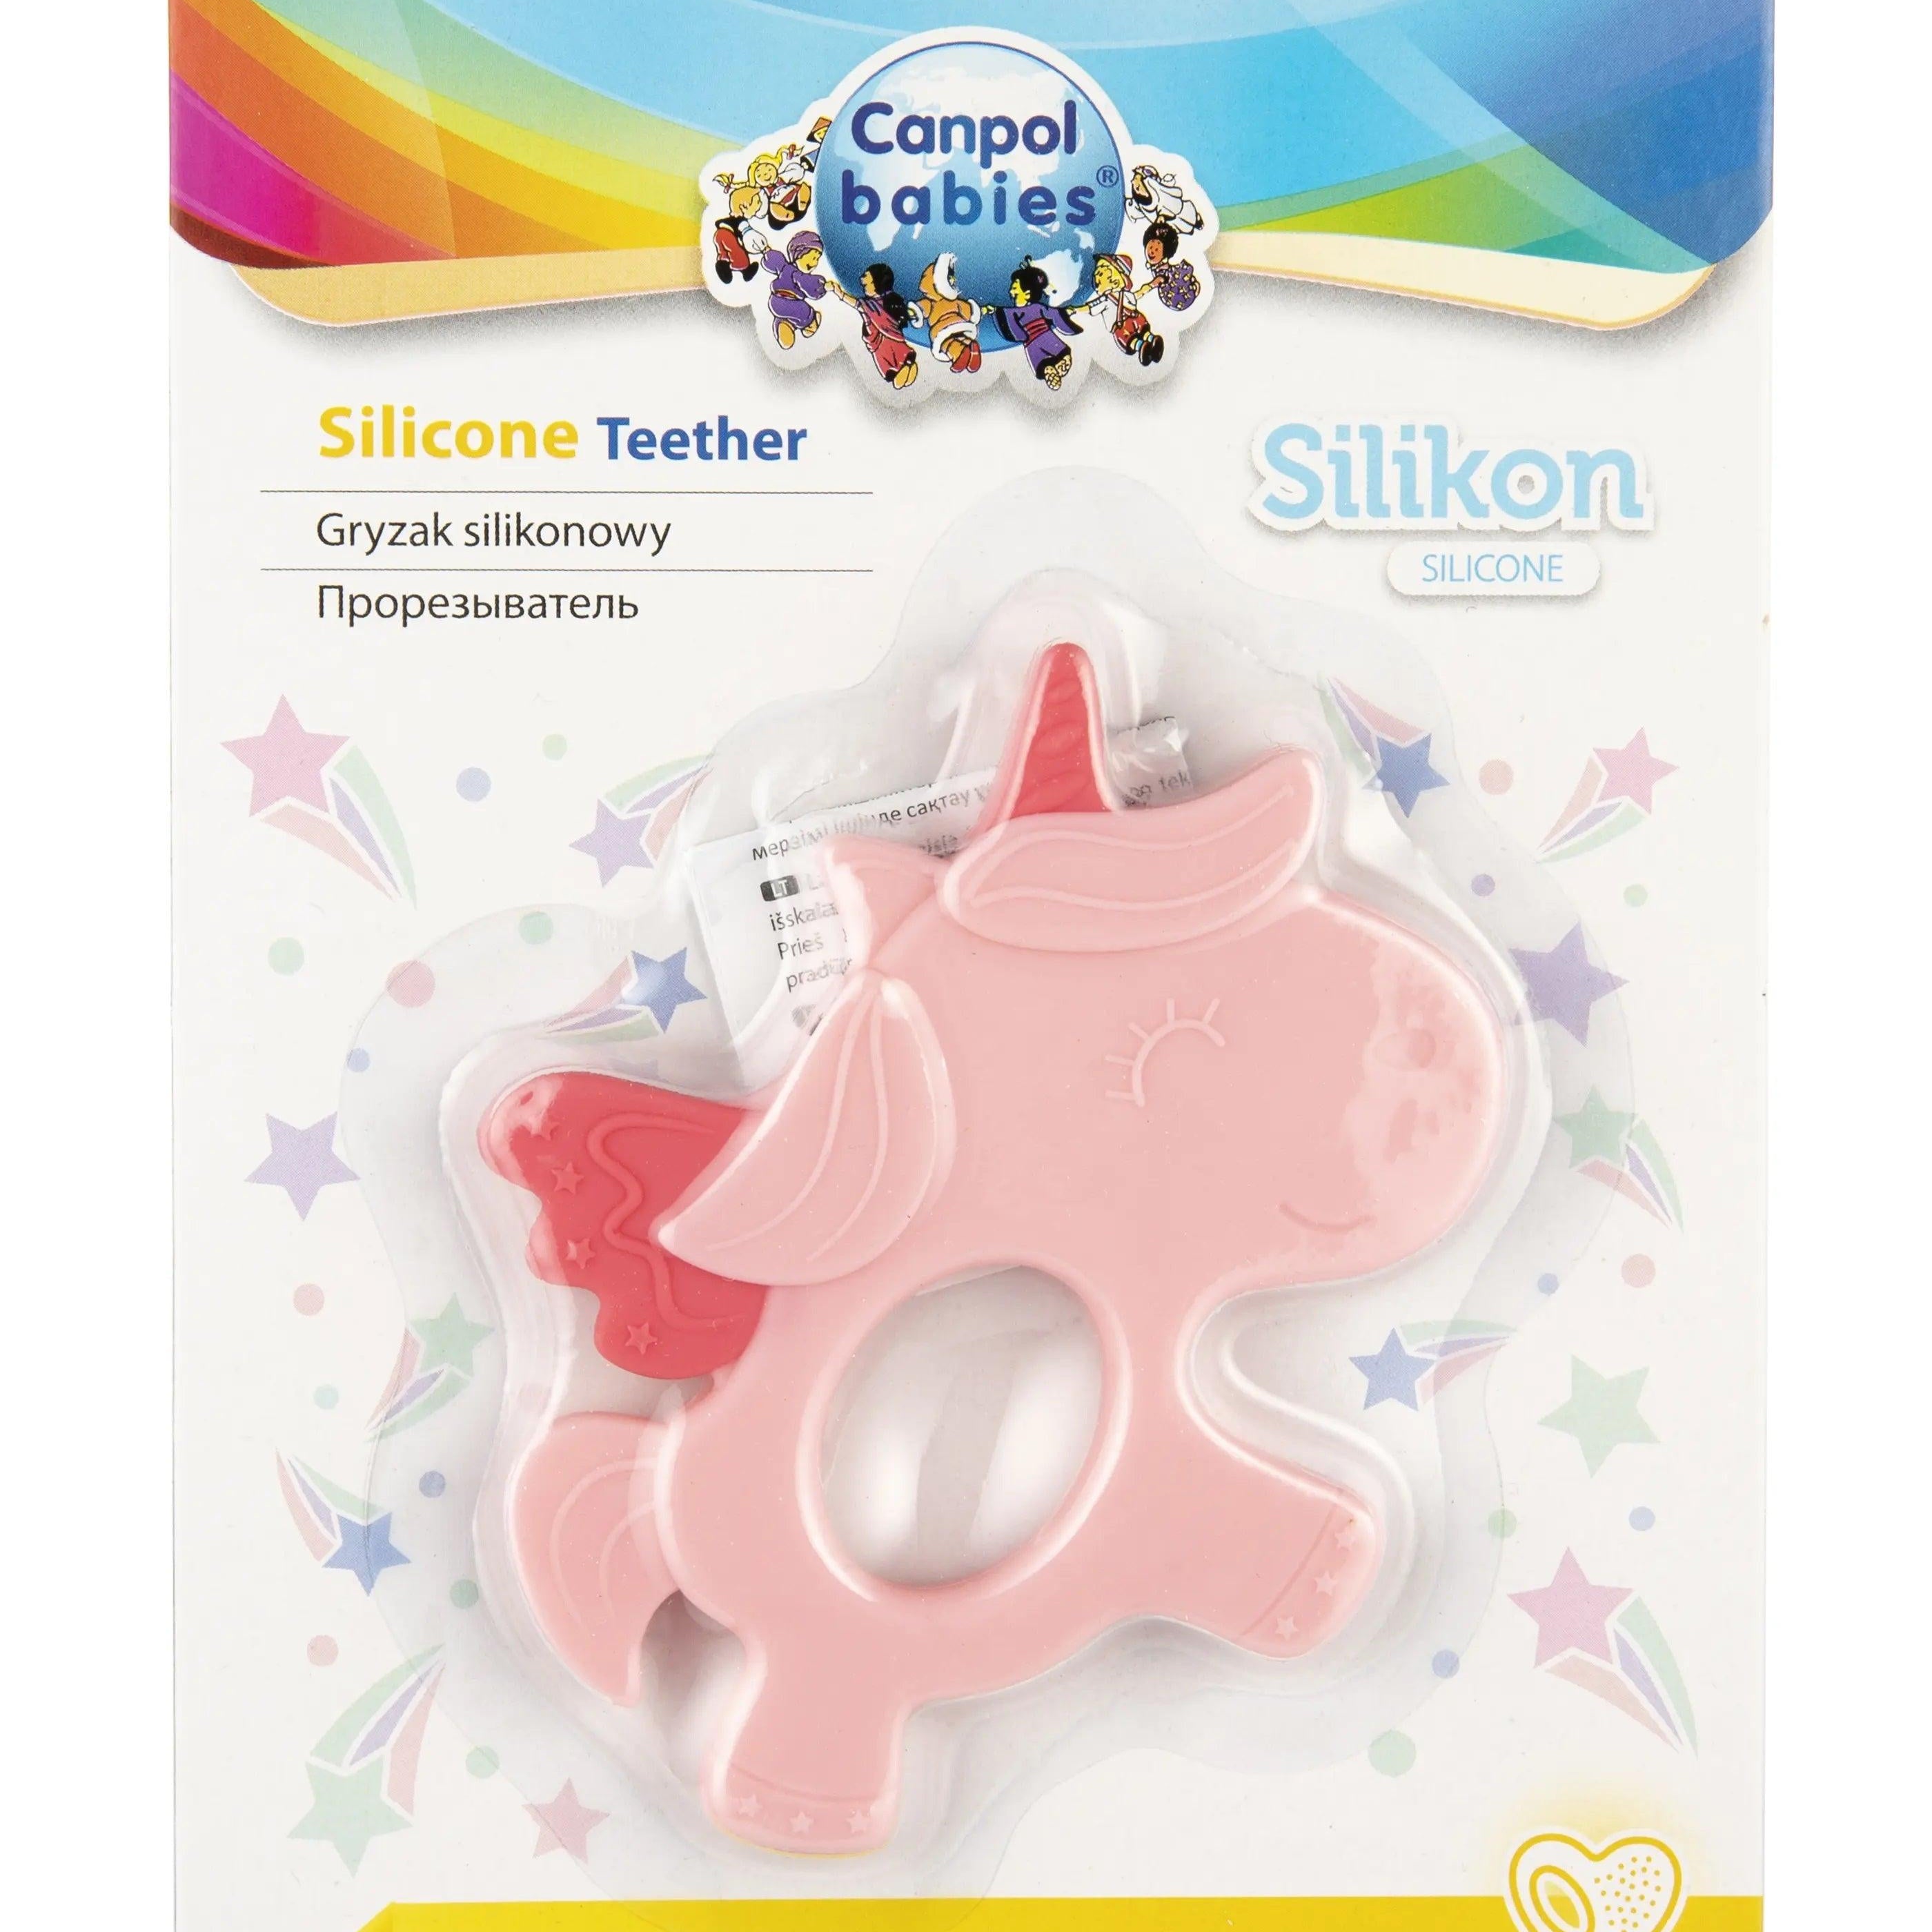 Canpol Babies Rodent Silicone Teether "Unicorn" - Ourkids - Canpol Babies